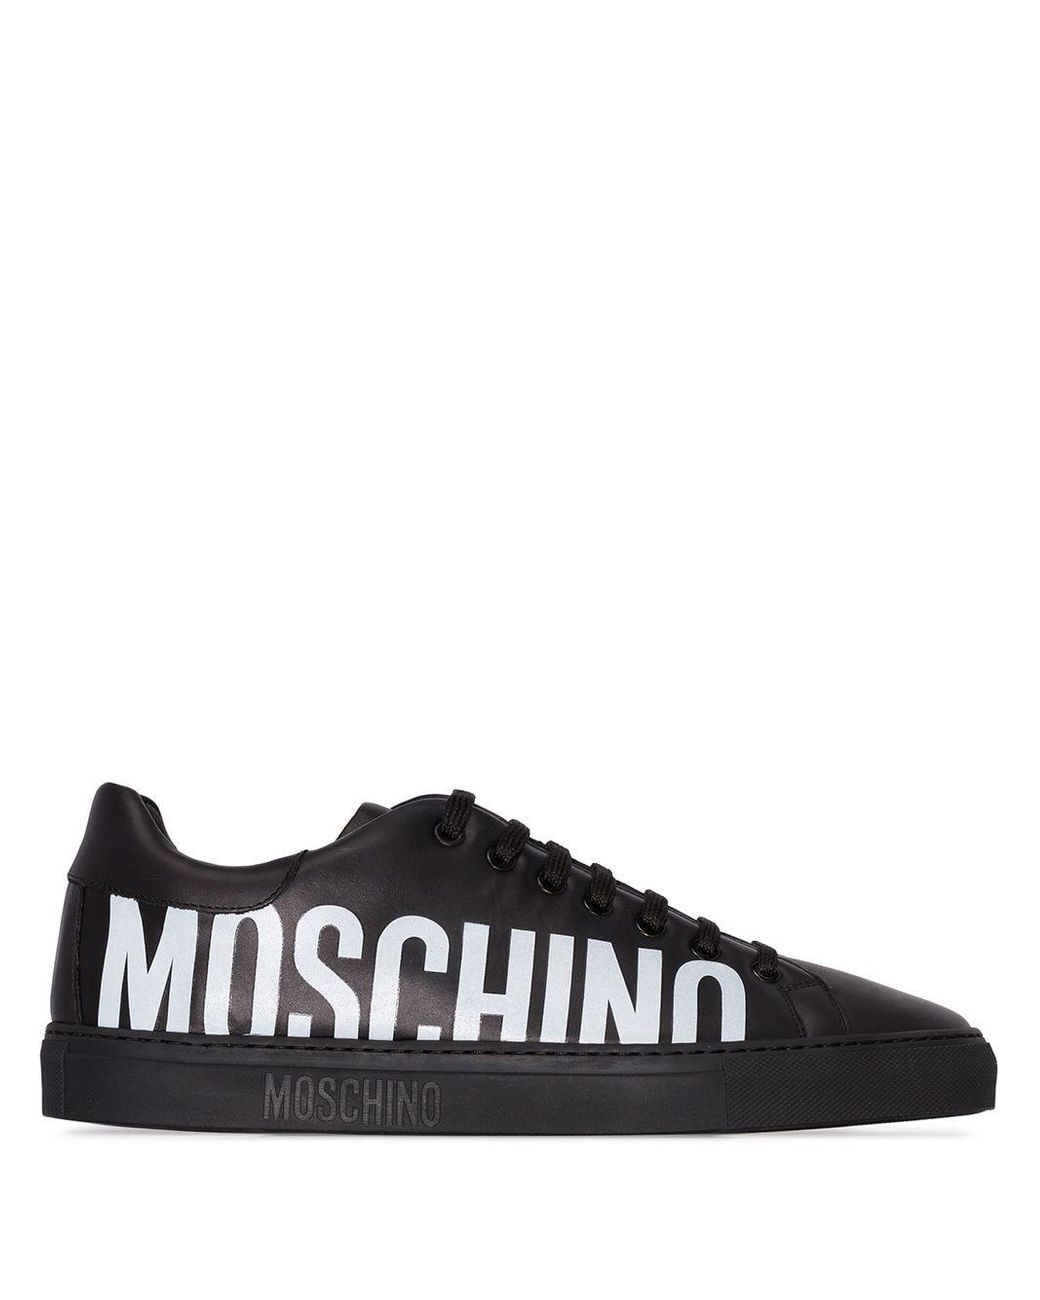 Moschino Leather Logo Low Top Sneakers in Black for Men - Lyst